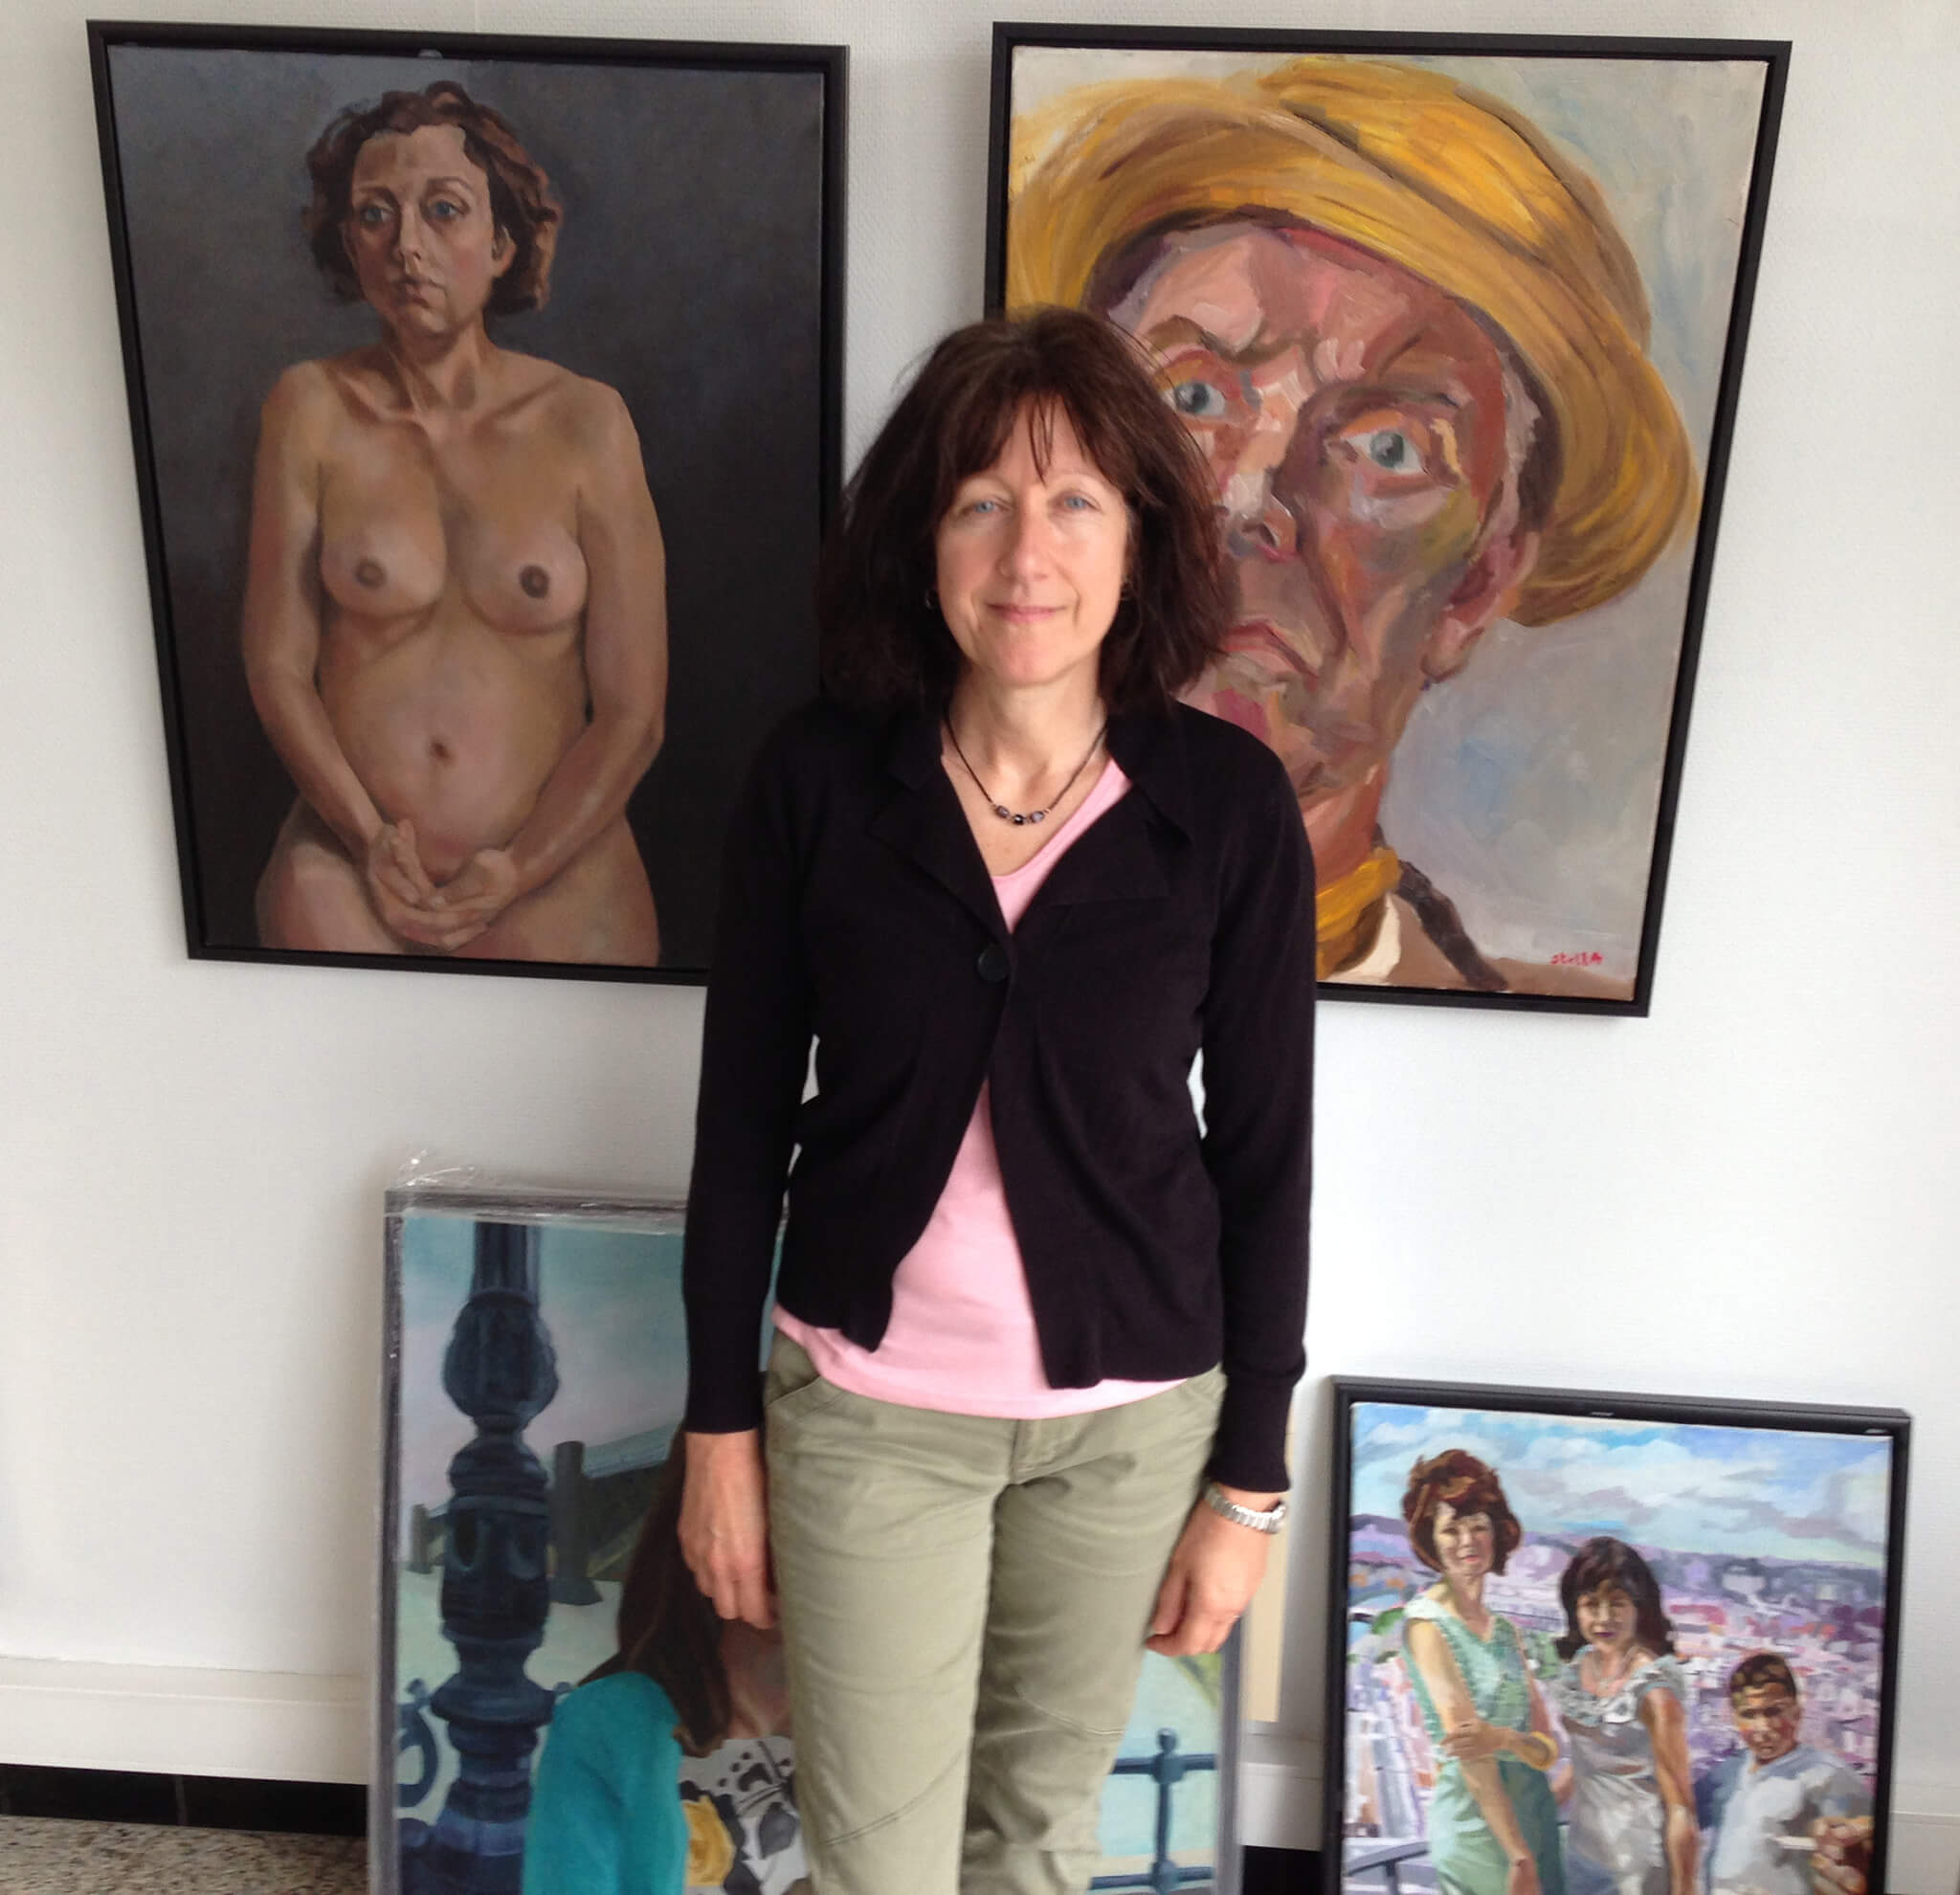 Artist Stella Tooth and oil portrait artworks in oils at Lissewege art gallery Belgium.